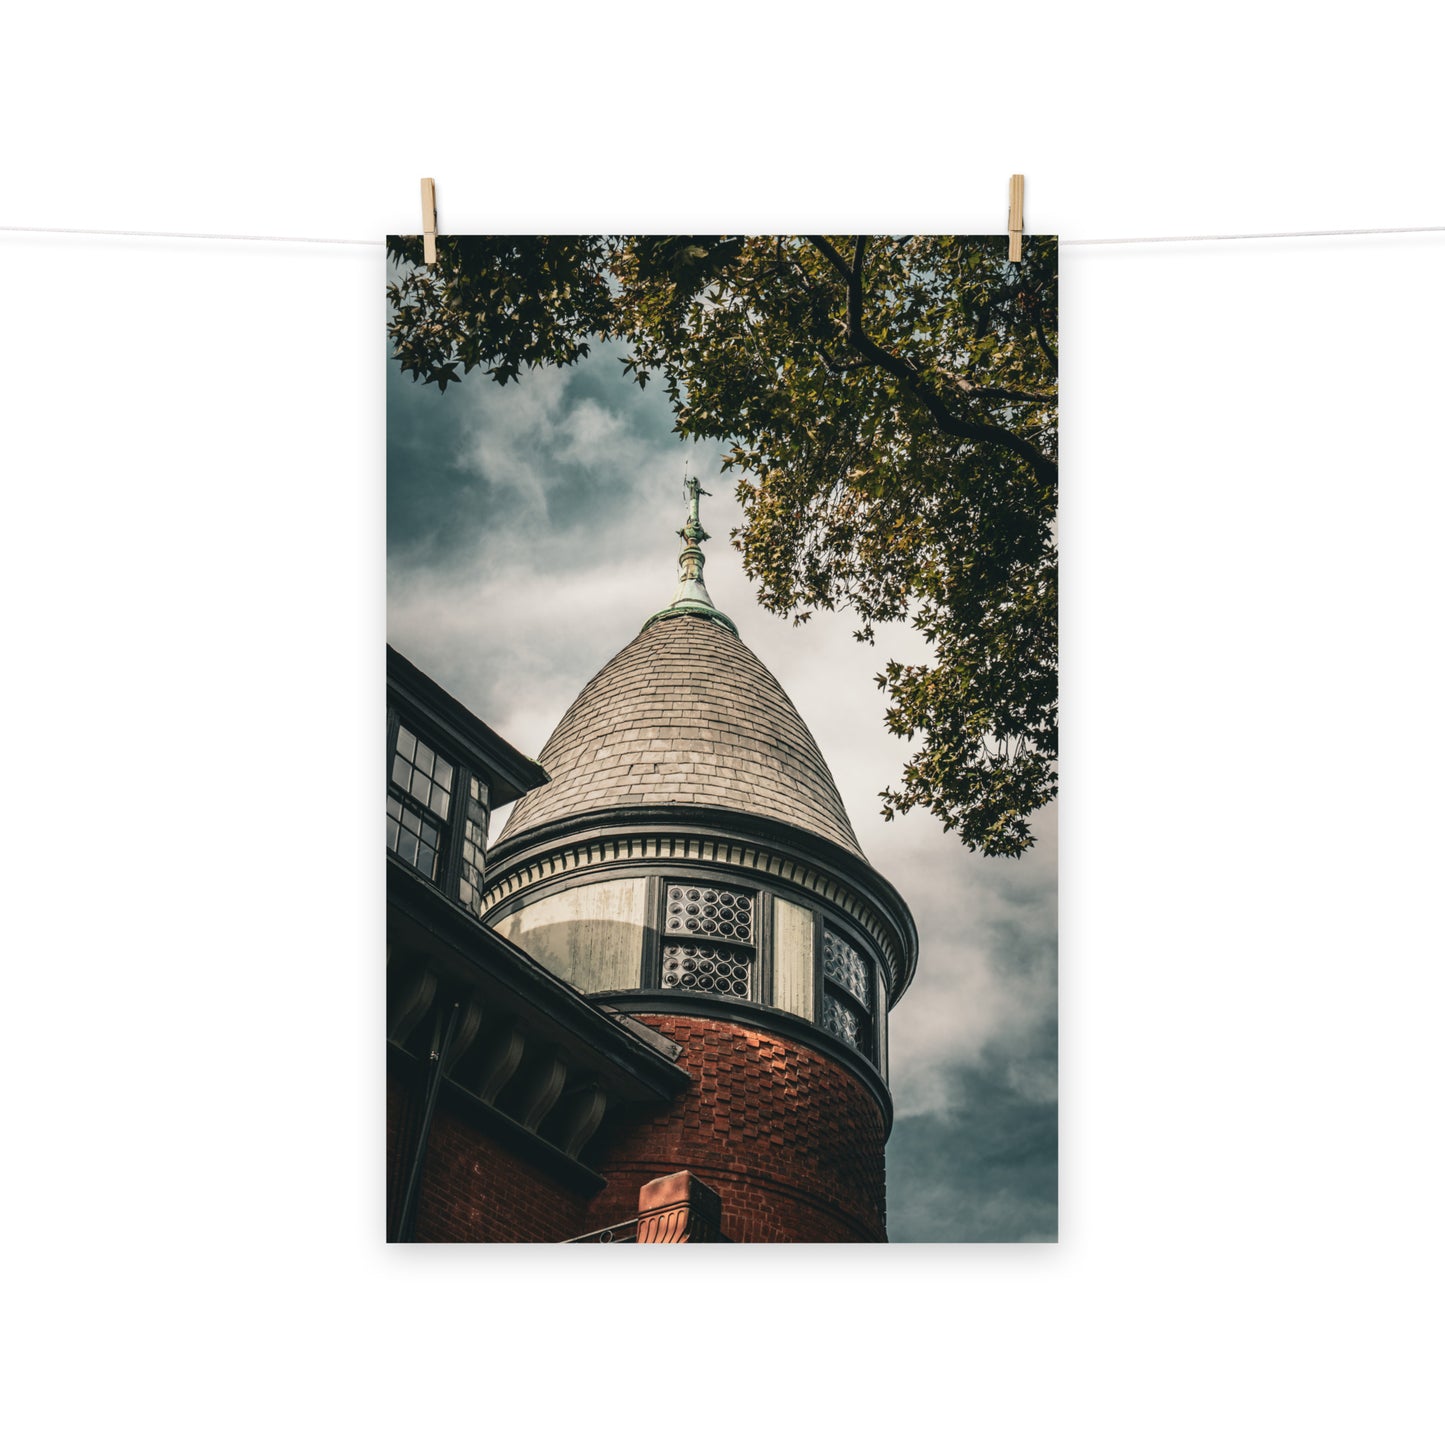 Architectural / Industrial / Cityscape Abstract Decor Cupola of Turret of George Baldwin House Savannah Ga Loose Wall Art Print 8" x 10"